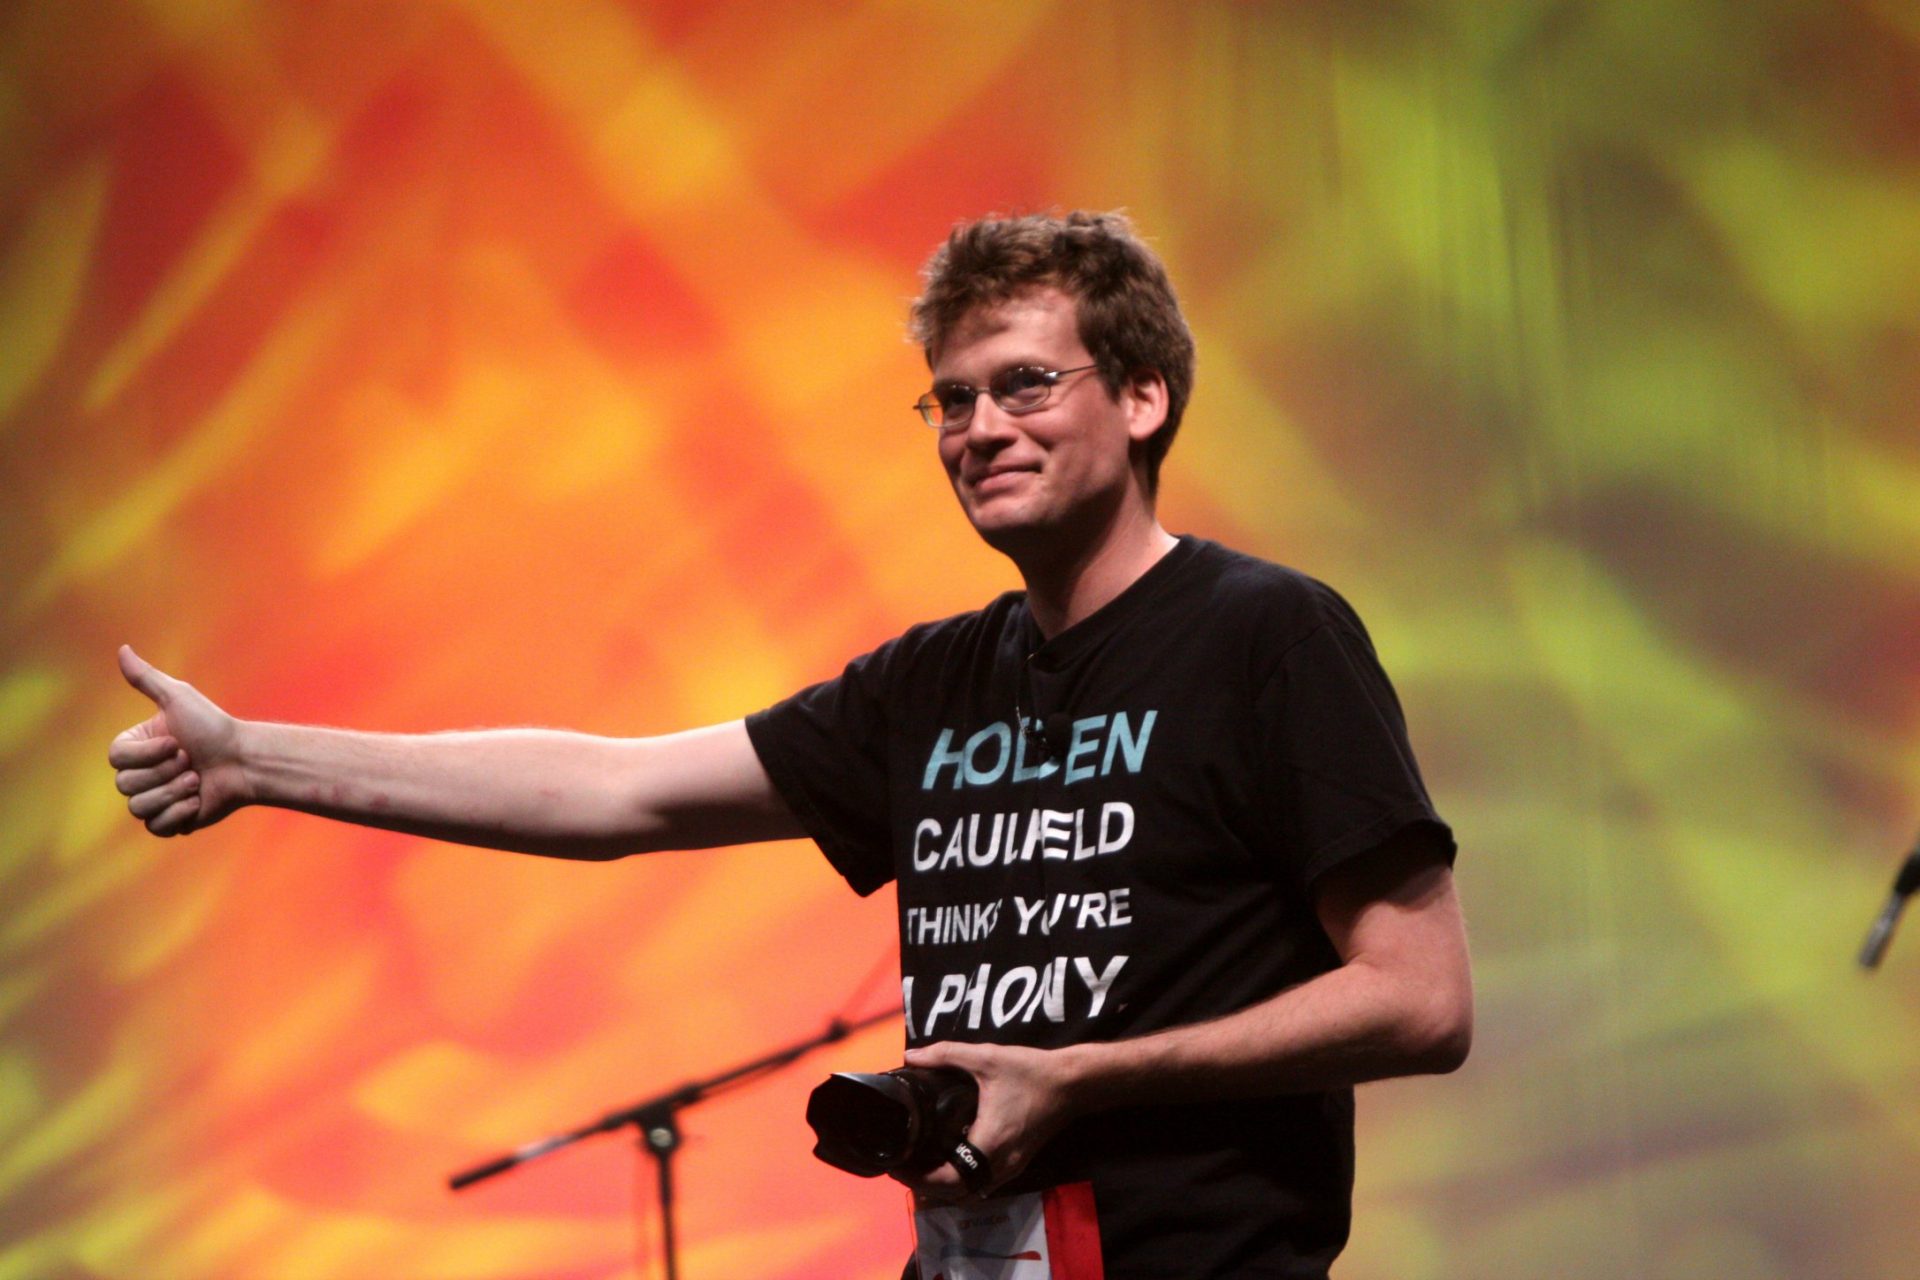 Author, educator, and man voted most likely to wear "Holden Caulfield thinks you're a phony" t-shirt John Green.